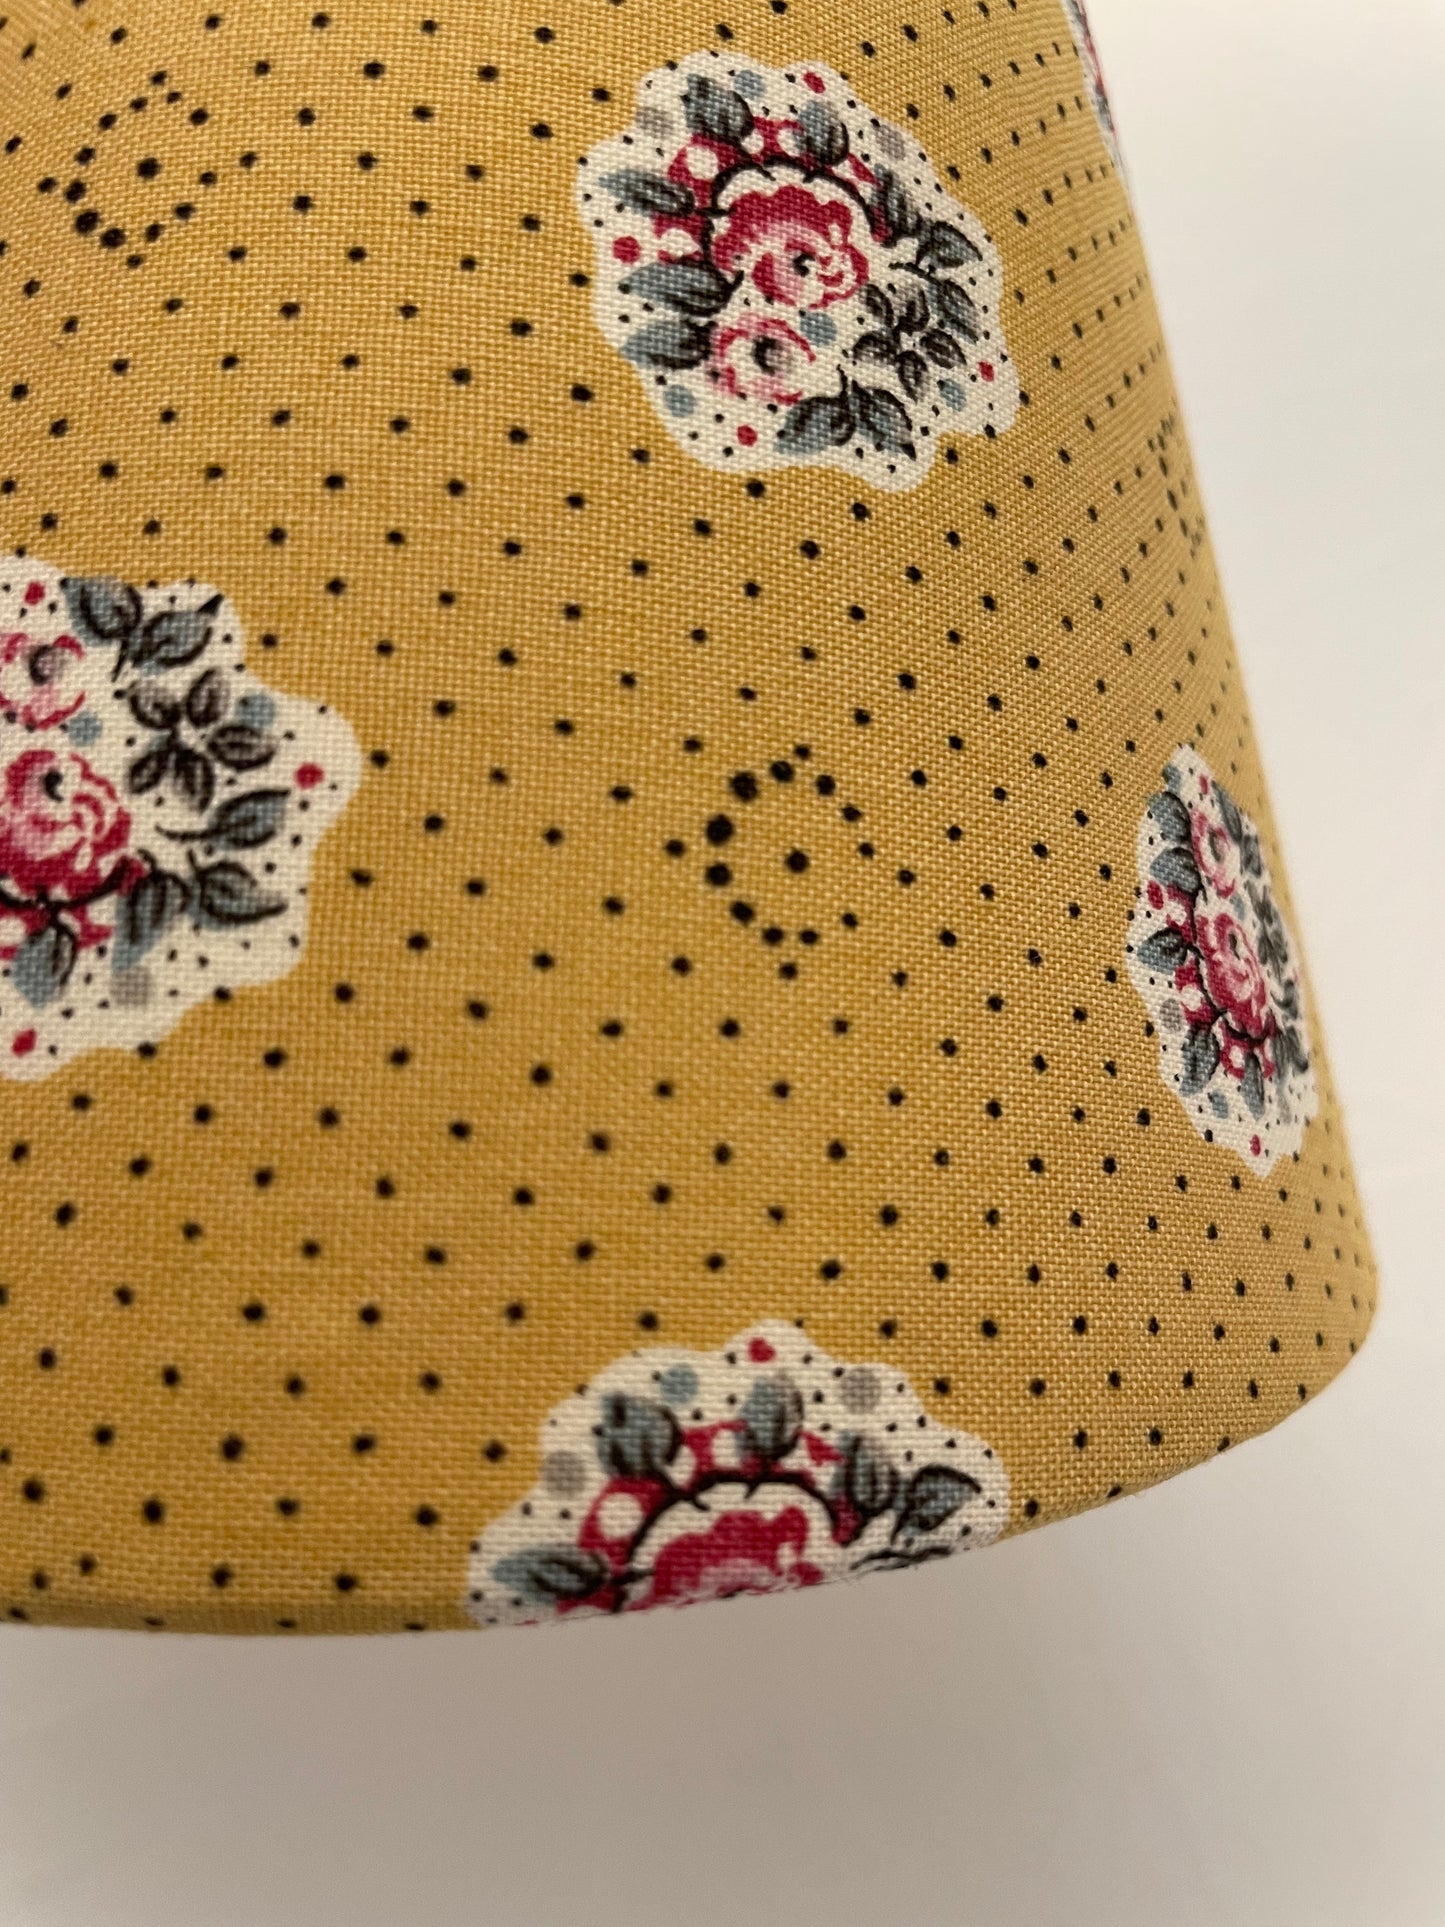 Small Clip-On Lampshade. Les Olivades "Maïanenco". Mustard Yellow with Pink Floral Bouquets.